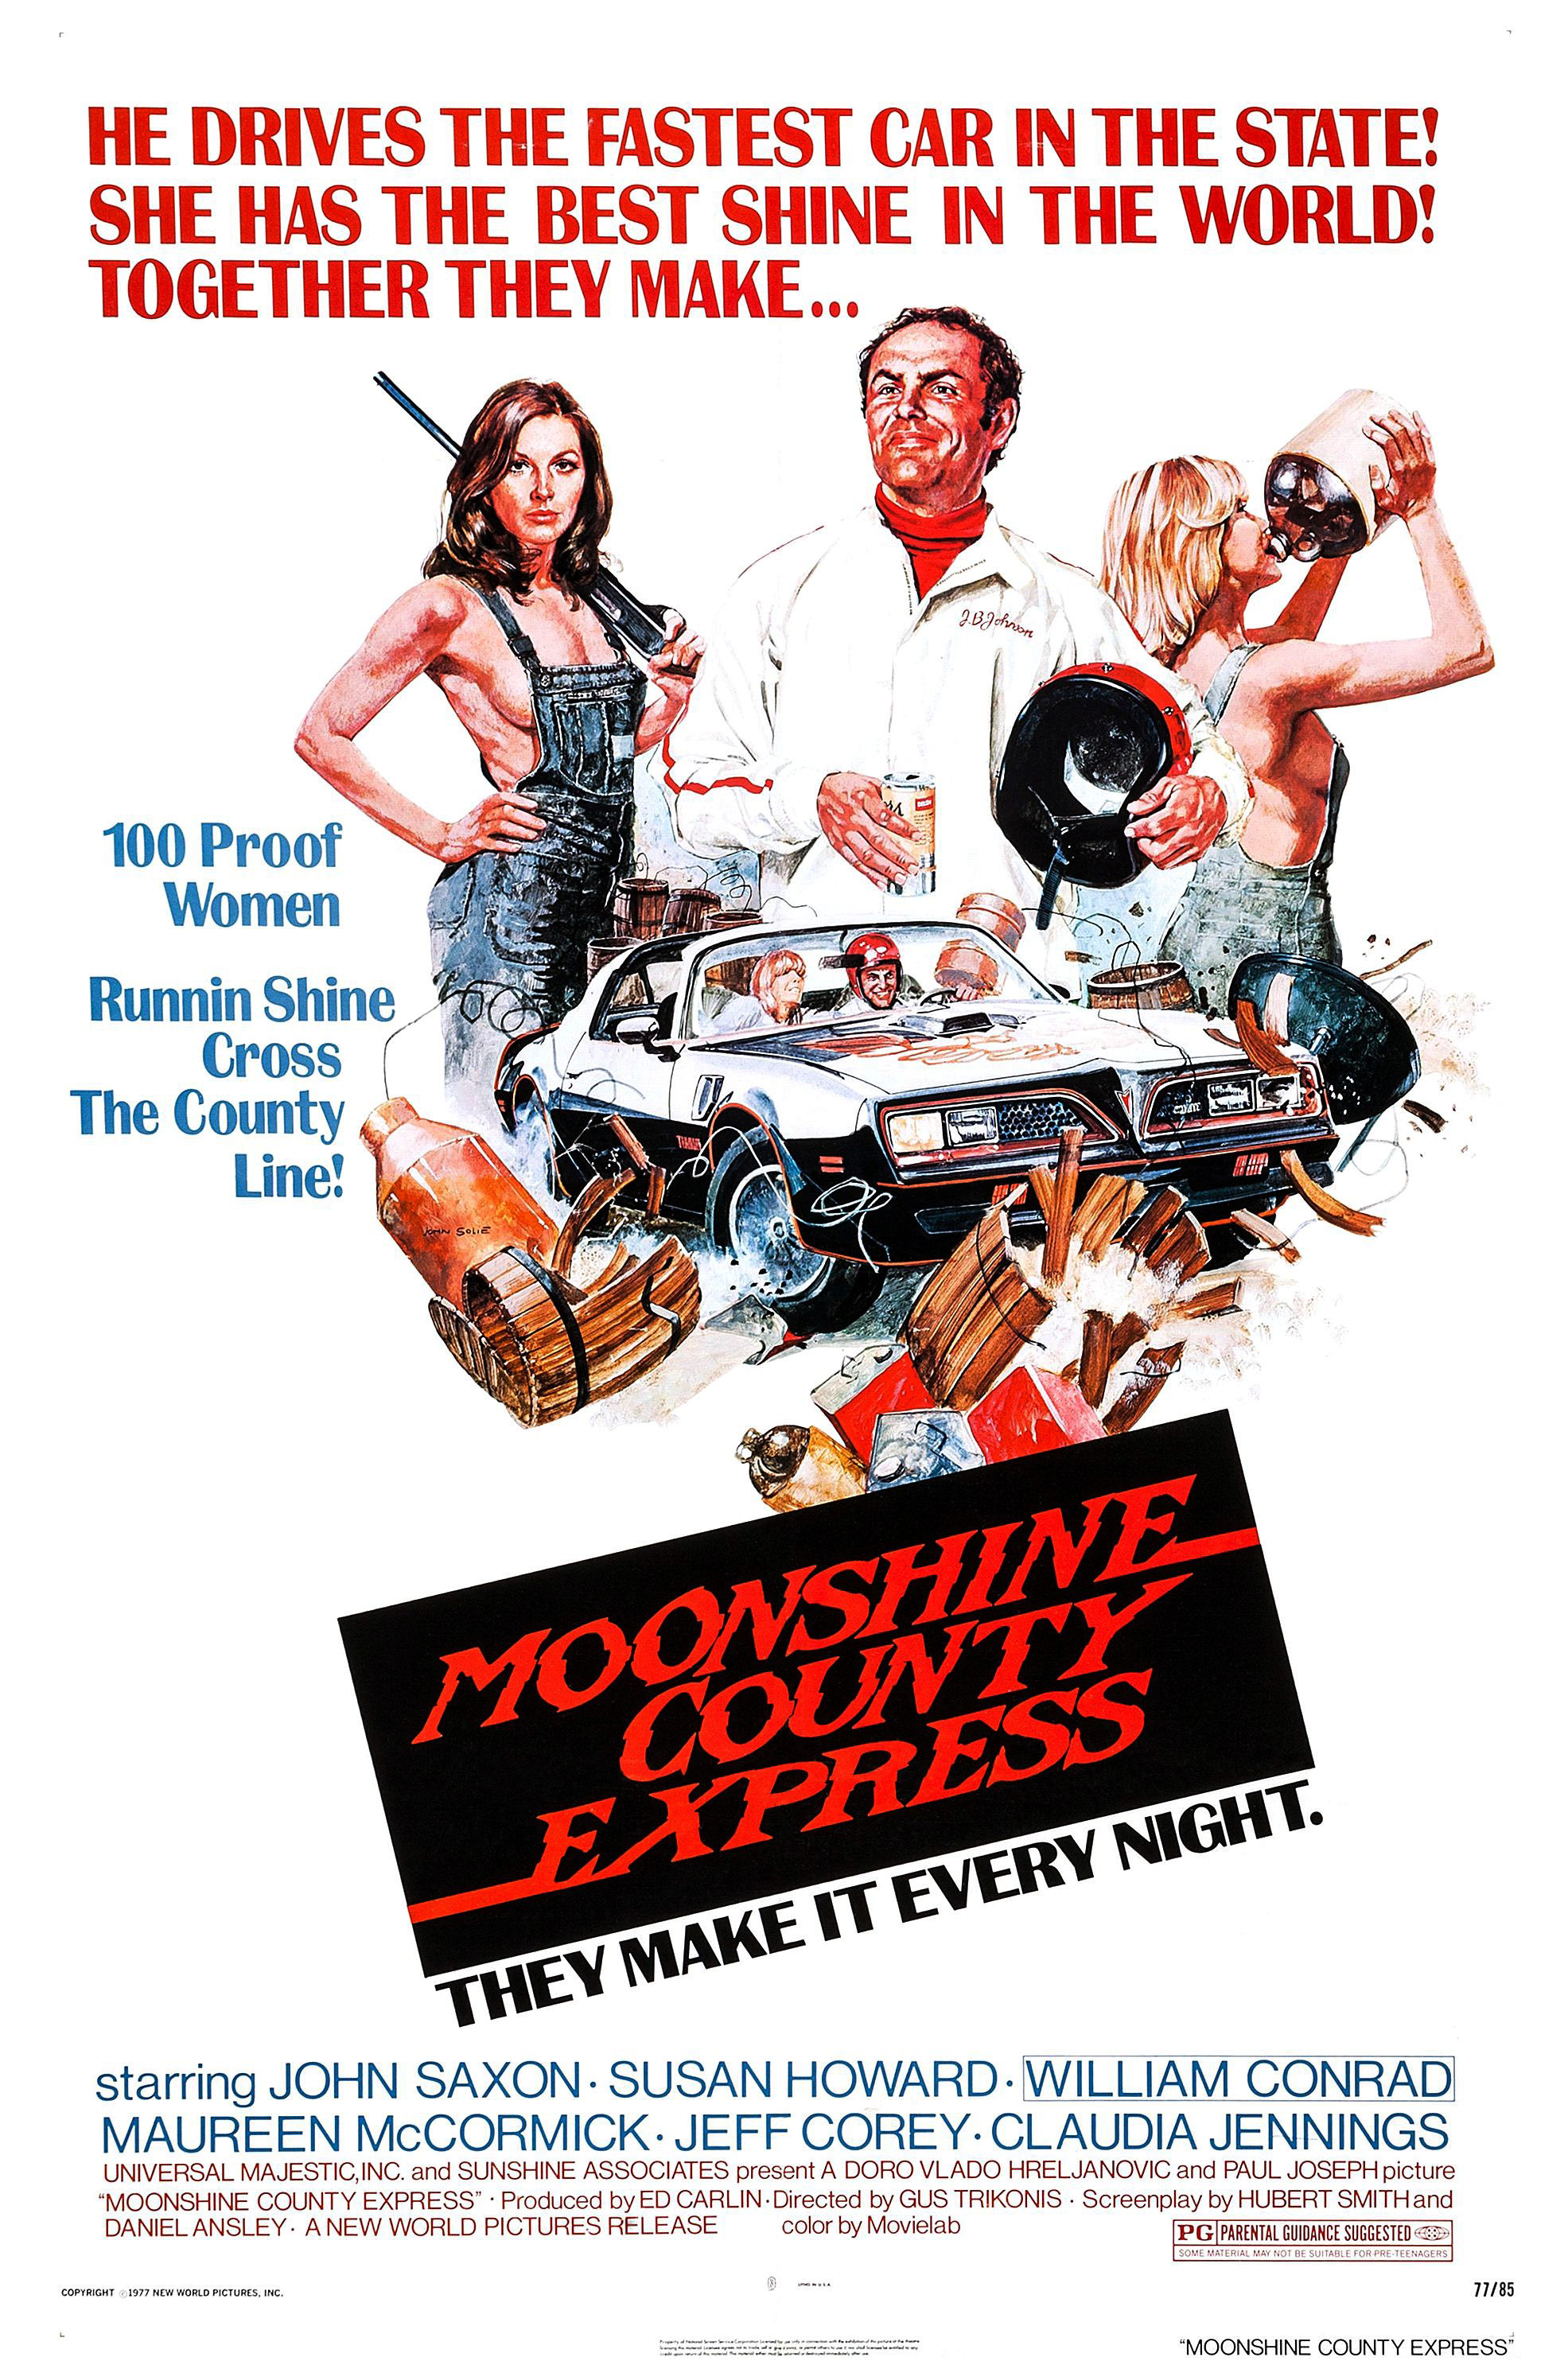 moonshine county express poster - He Drives The Fastest Car In The State! She Has The Best Shine In The World! Together They Make... 100 Proof Women Runnin Shine Cross The County Line! Moonshine County Express They Make It Every Night starring John Saxon 